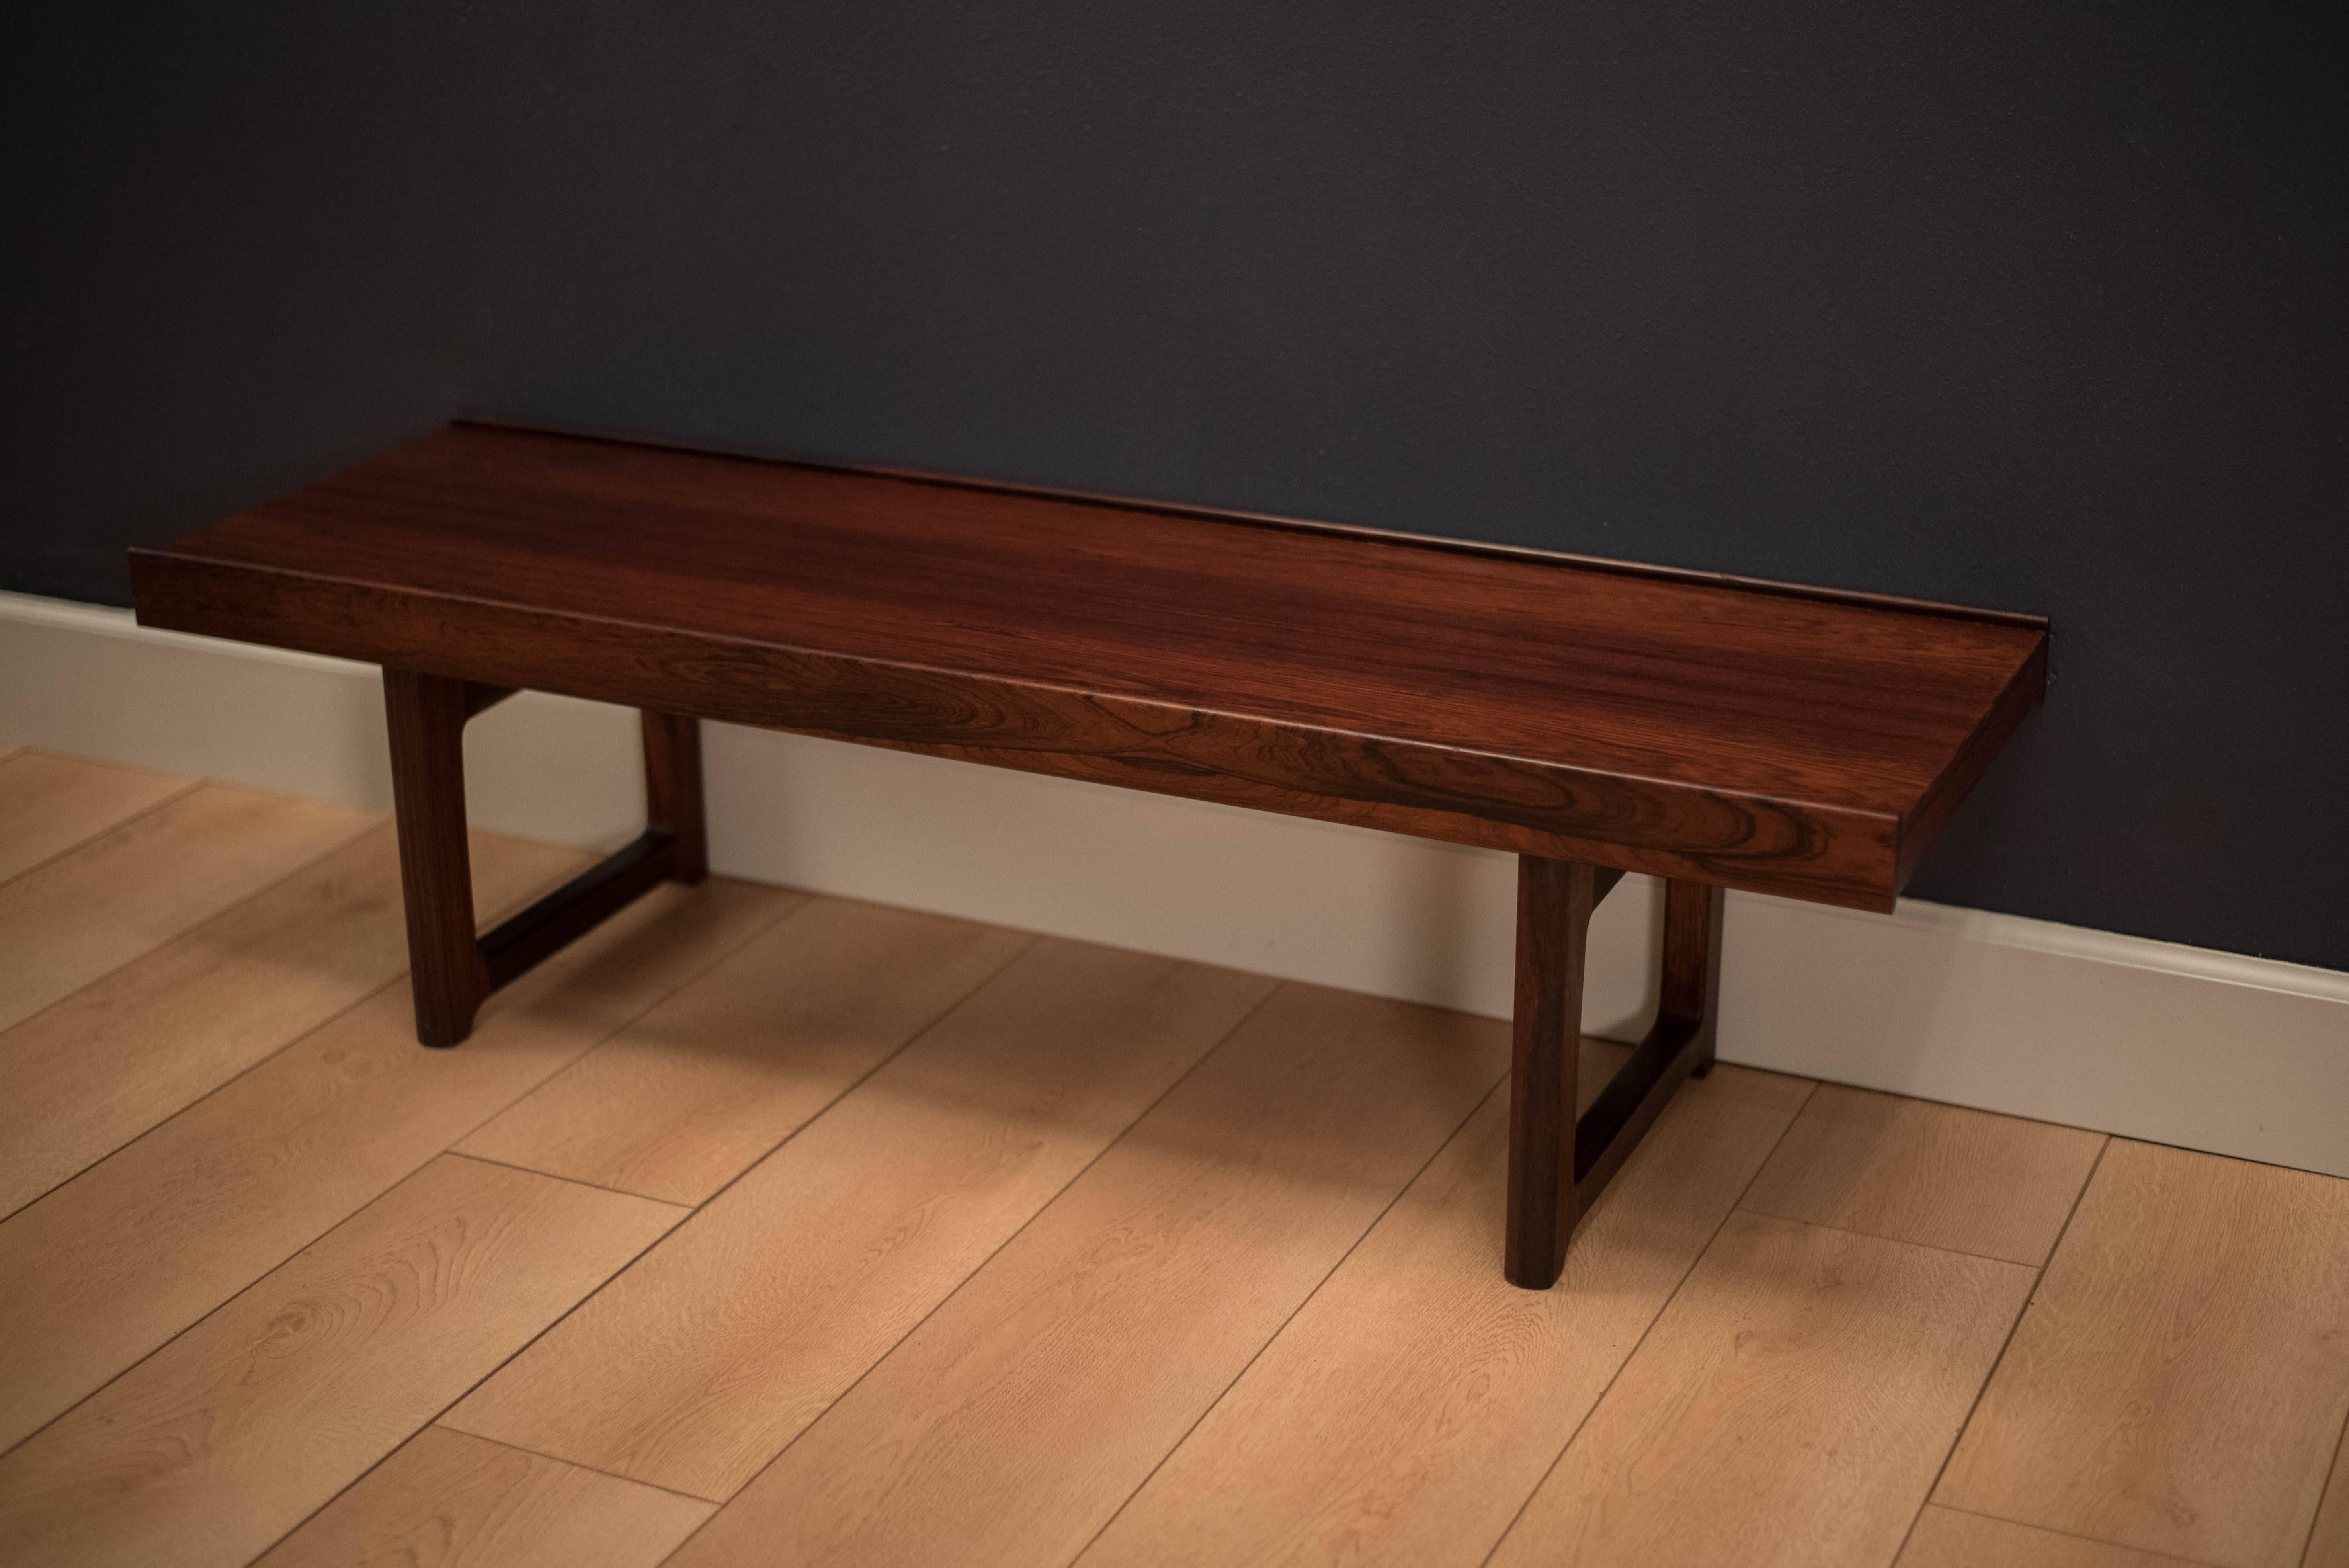 Torbjorn Afdal 'Korbo' bench or coffee table for Bruksbo made in Norway. This piece displays rich rosewood grain patterns and sculpted edges. Functions as a bench, coffee table or entryway piece.